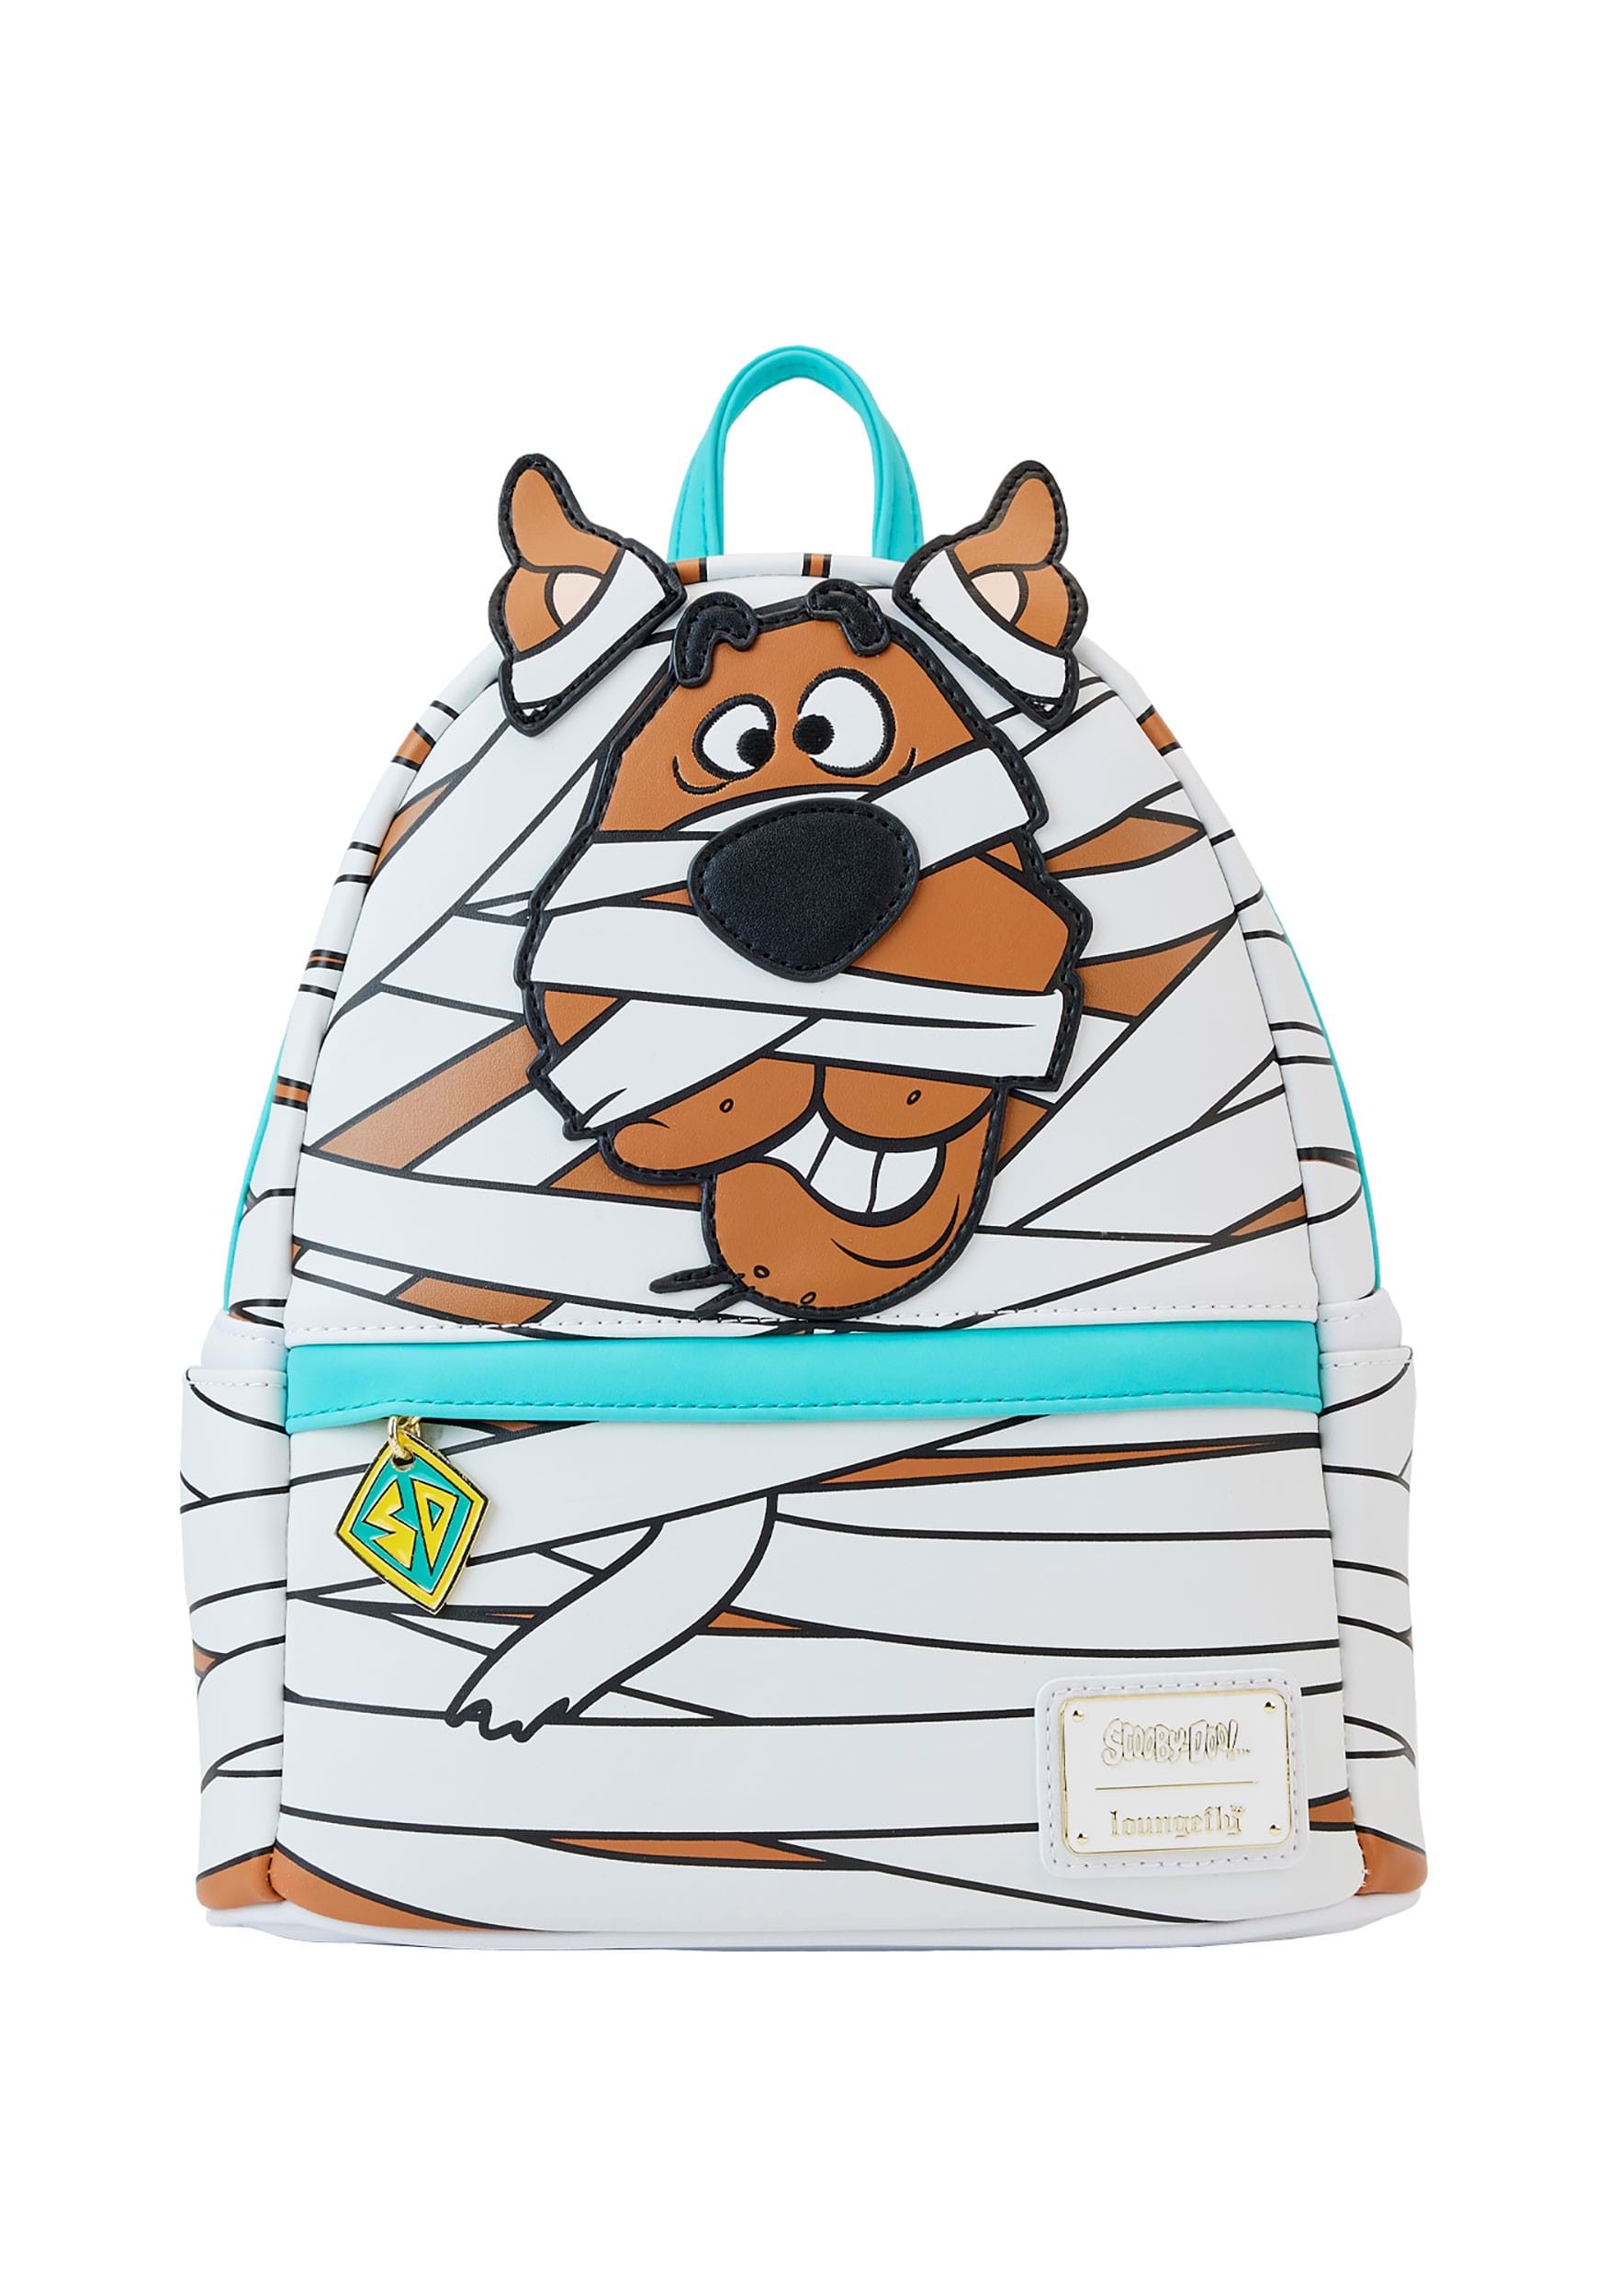 Image of Loungefly WB Scooby Doo Mummy Mini Backpack | Scooby Doo Accessories ID LFSBDBK0014-ST